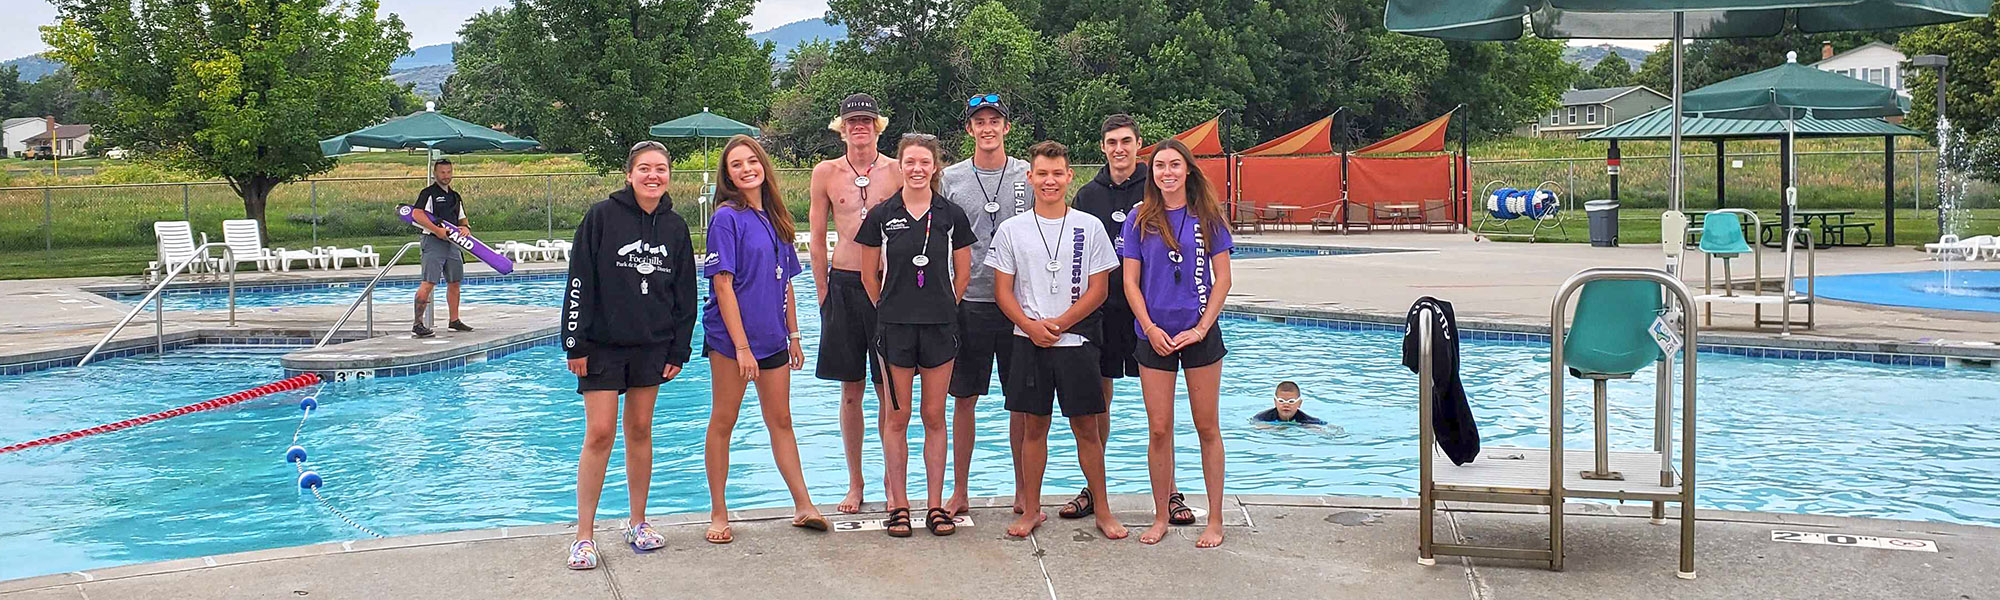 Group of lifeguards standing in front of an outdoor pool.